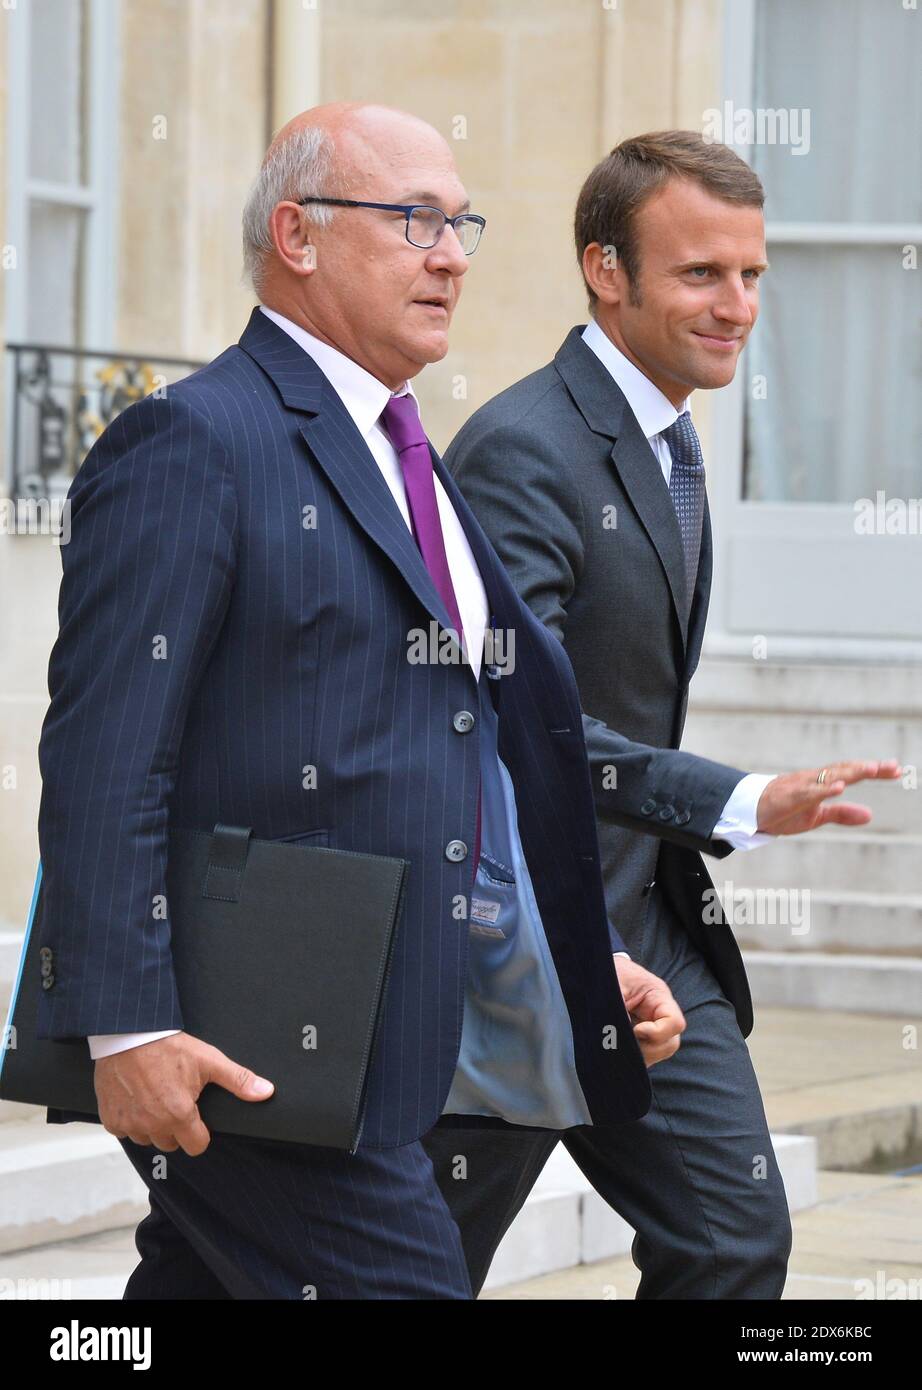 French Finance Minister Michel Sapin and newly-appointed Economy Minister Emmanuel Macron leaving the Elysee presidential palace in Paris, France after a weekly cabinet meeting. French President Francois Hollande on August 27 installed a former banker and ally as economy minister in an emergency reshuffle seen as the 'last chance' to haul France out of the biggest crisis of his presidency. Hollande caught everyone off guard with the appointment of Emmanuel Macron, a 36-year-old ex-Rothschild banker and architect of the president's economic policy. Photo by Christian Liewig/ABACAPRESS.COM Stock Photo